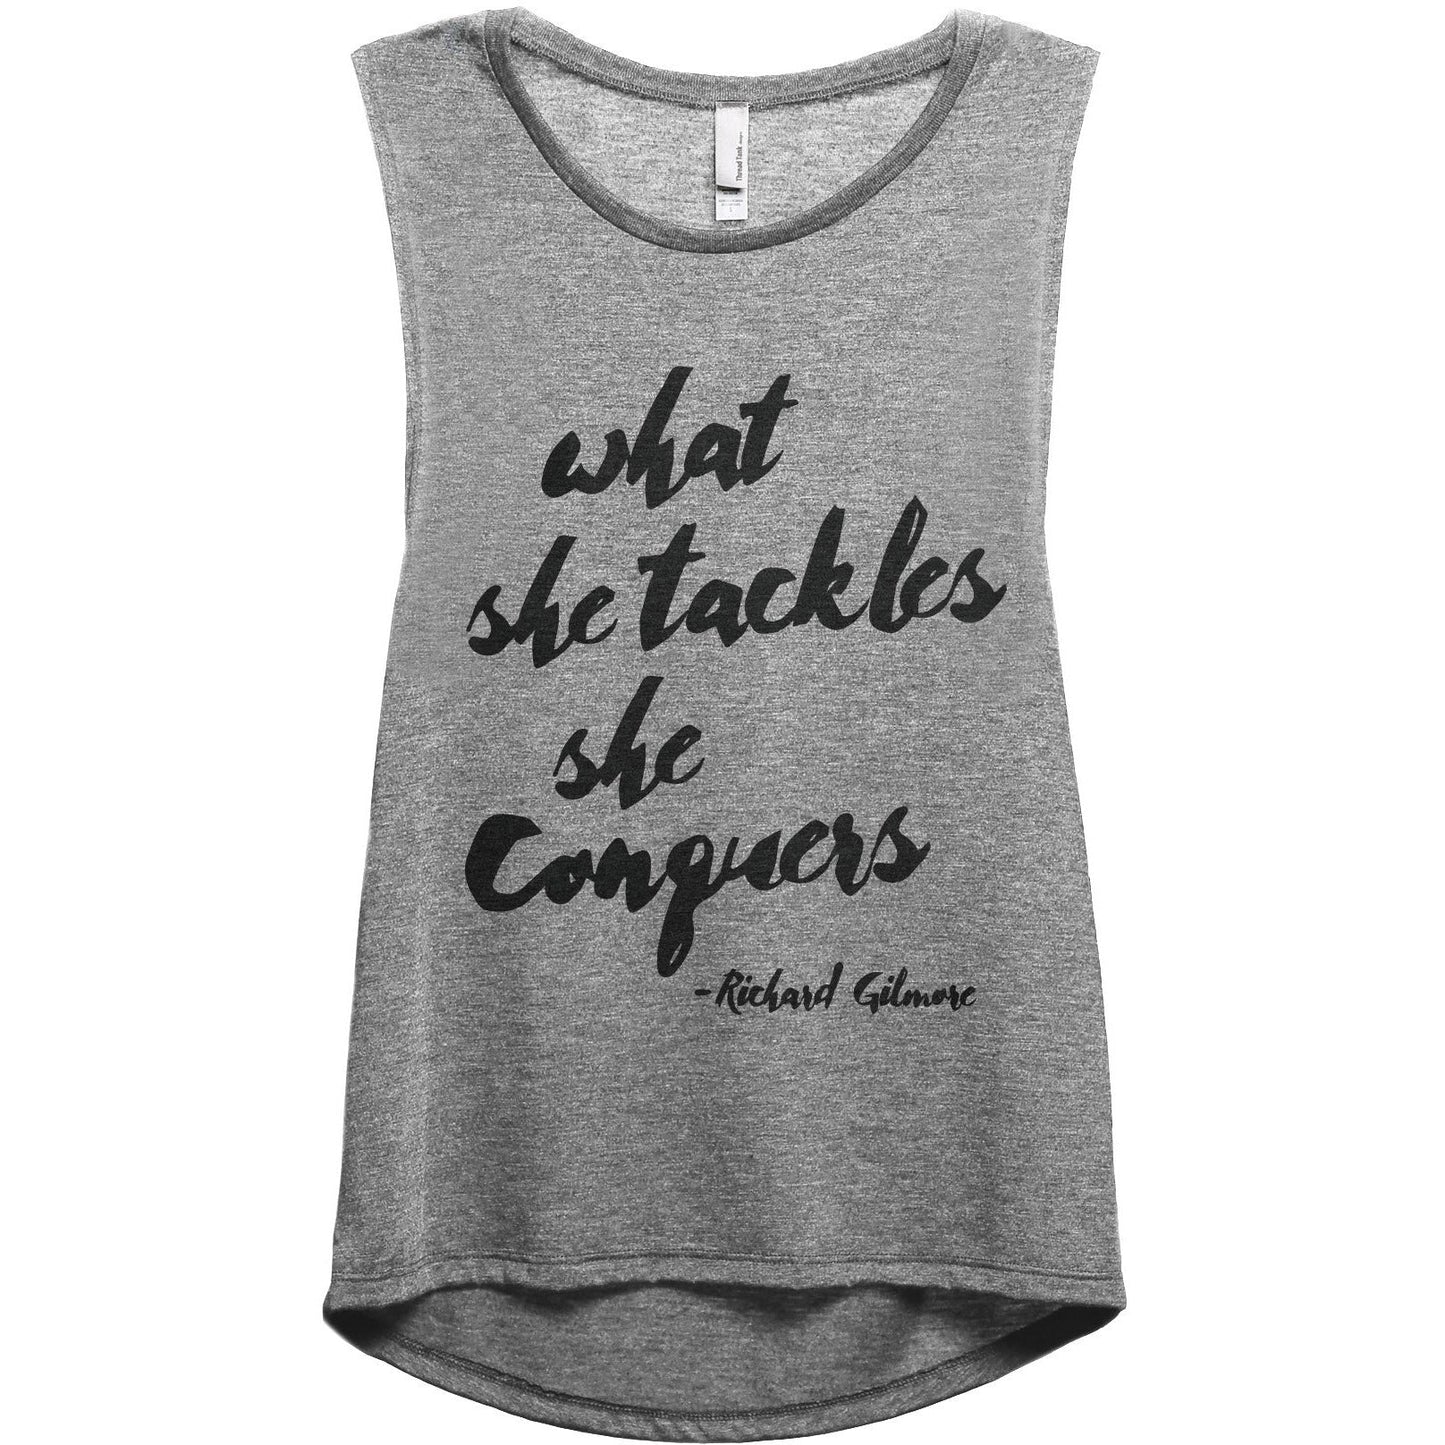 What She Tackles She Conquers - Stories You Can Wear